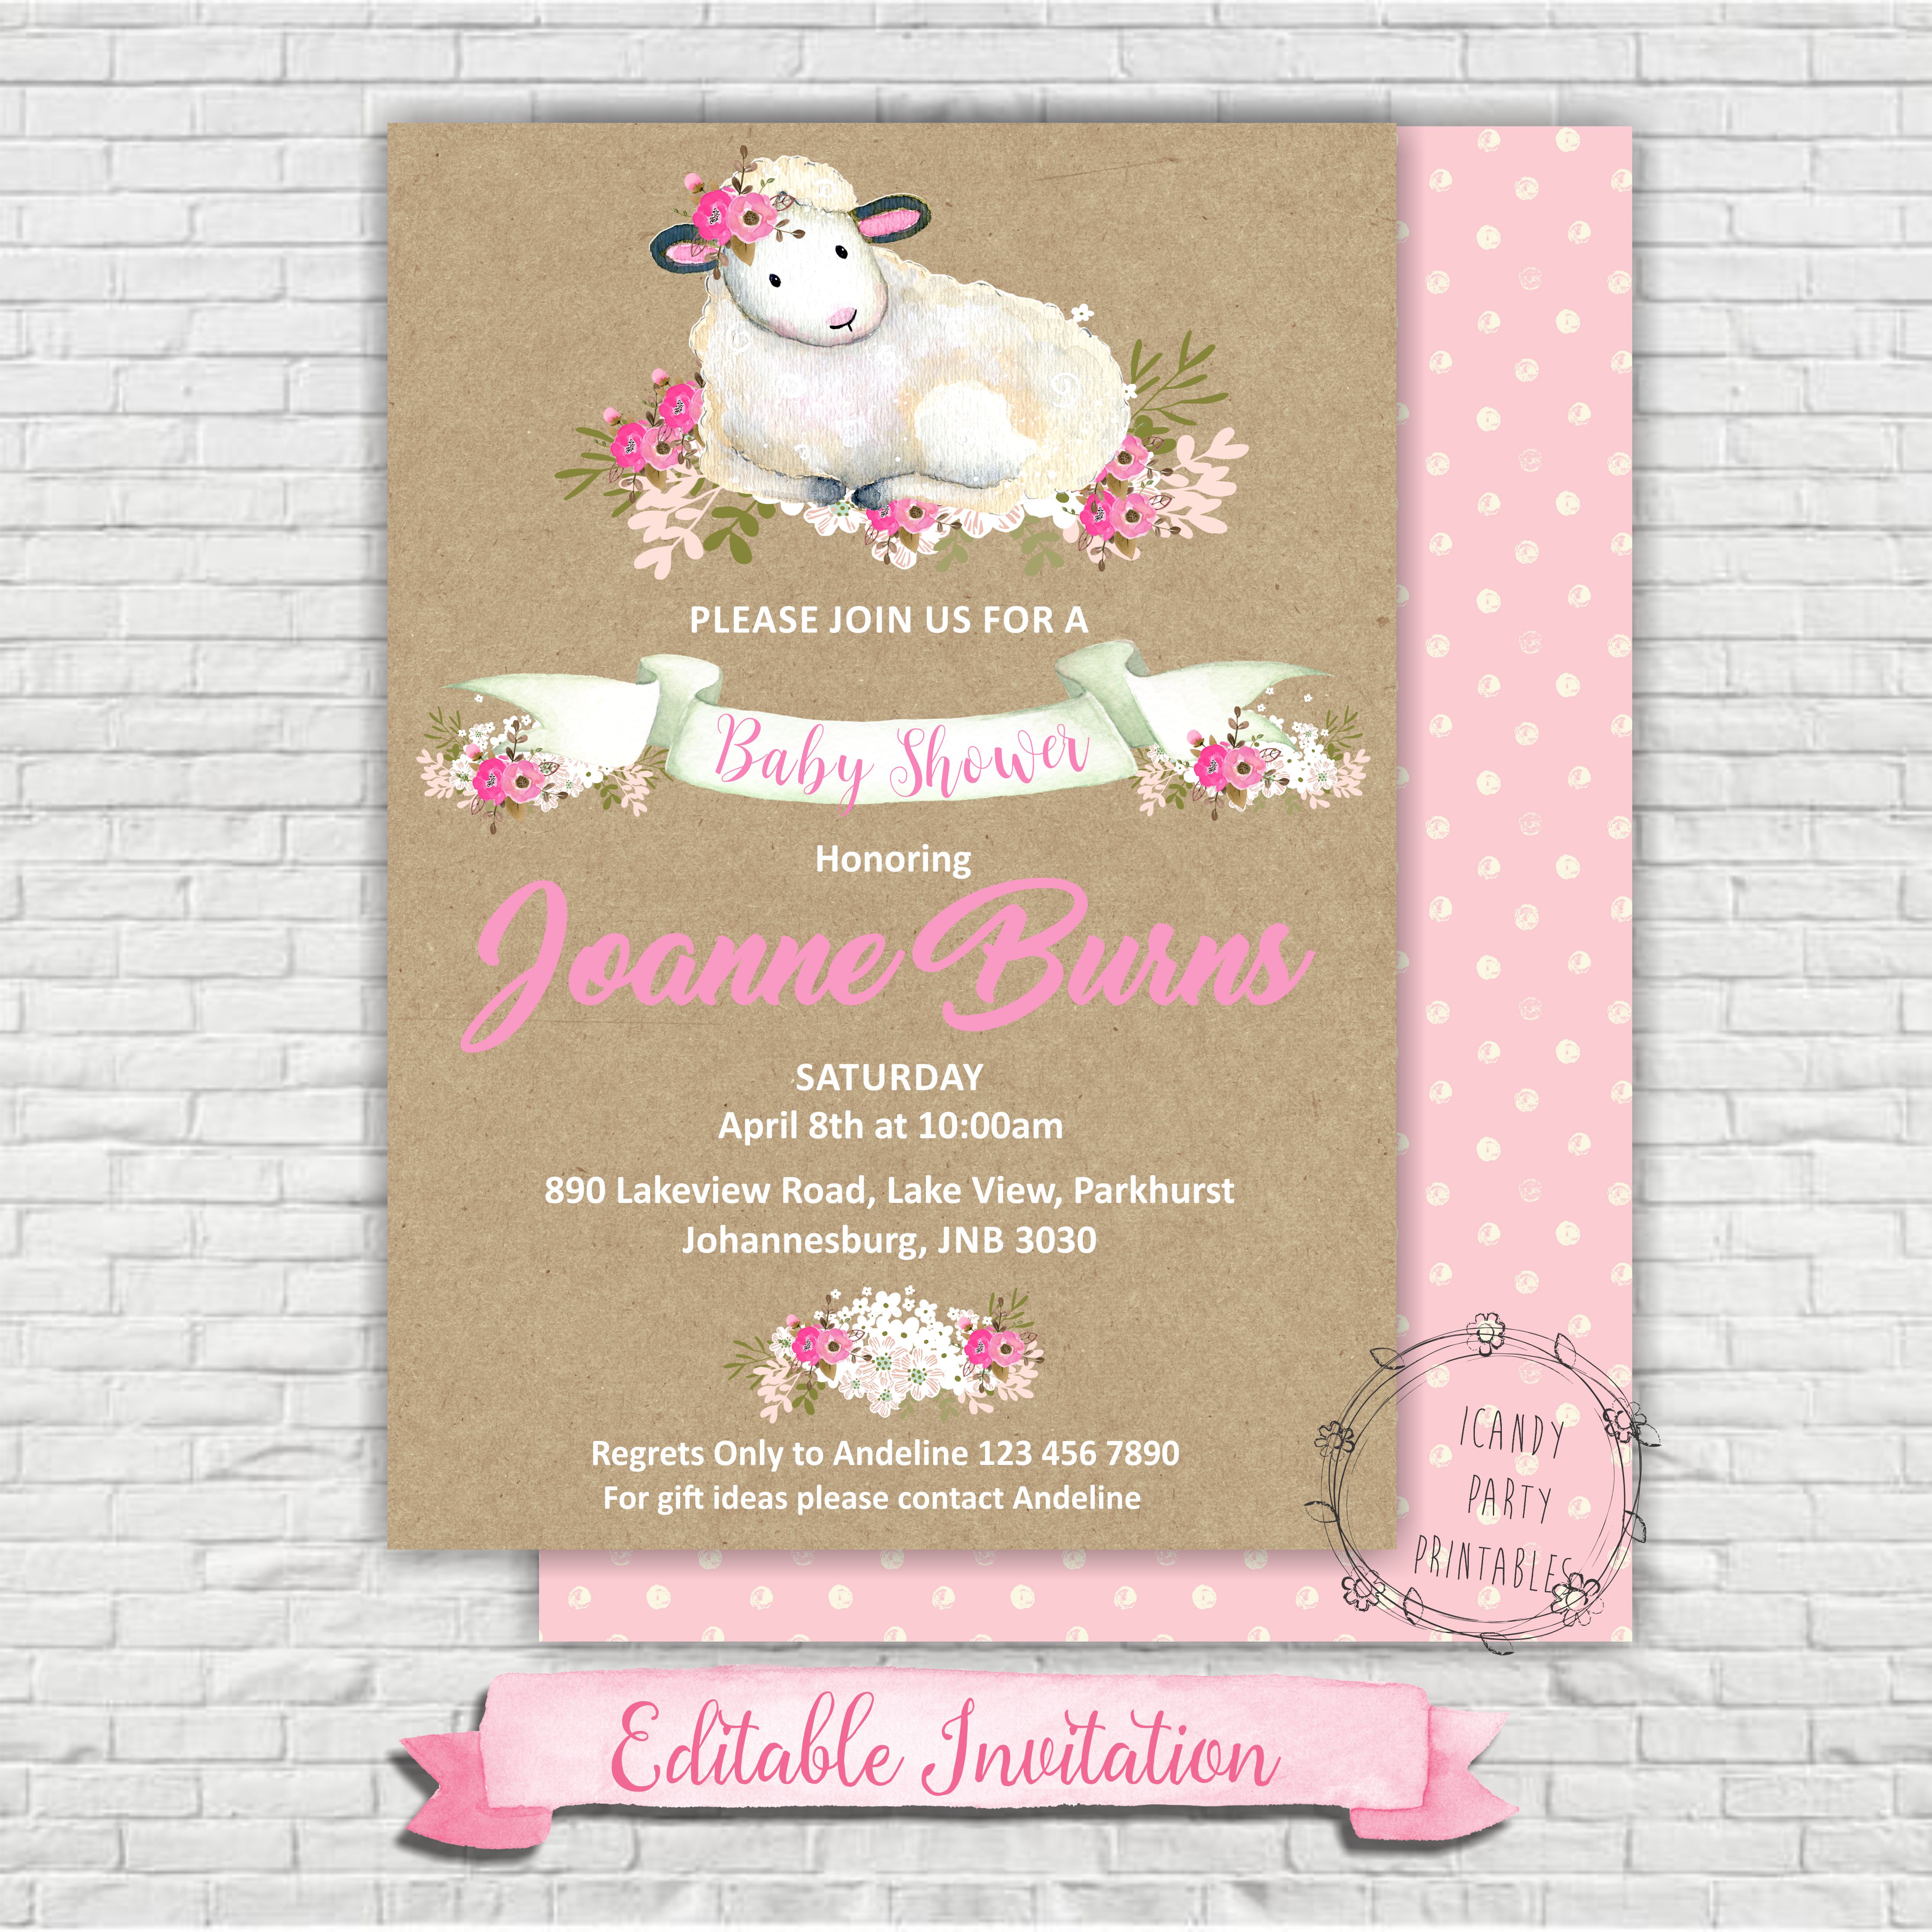 Full Size of Baby Shower:nursery Themes Elegant Baby Shower Unique Baby Shower Decorations Pinterest Baby Shower Ideas For Girls Baby Shower Card Message Ideas Baby Girl Party Plates Baby Shower Invitations Baby Shower Favors